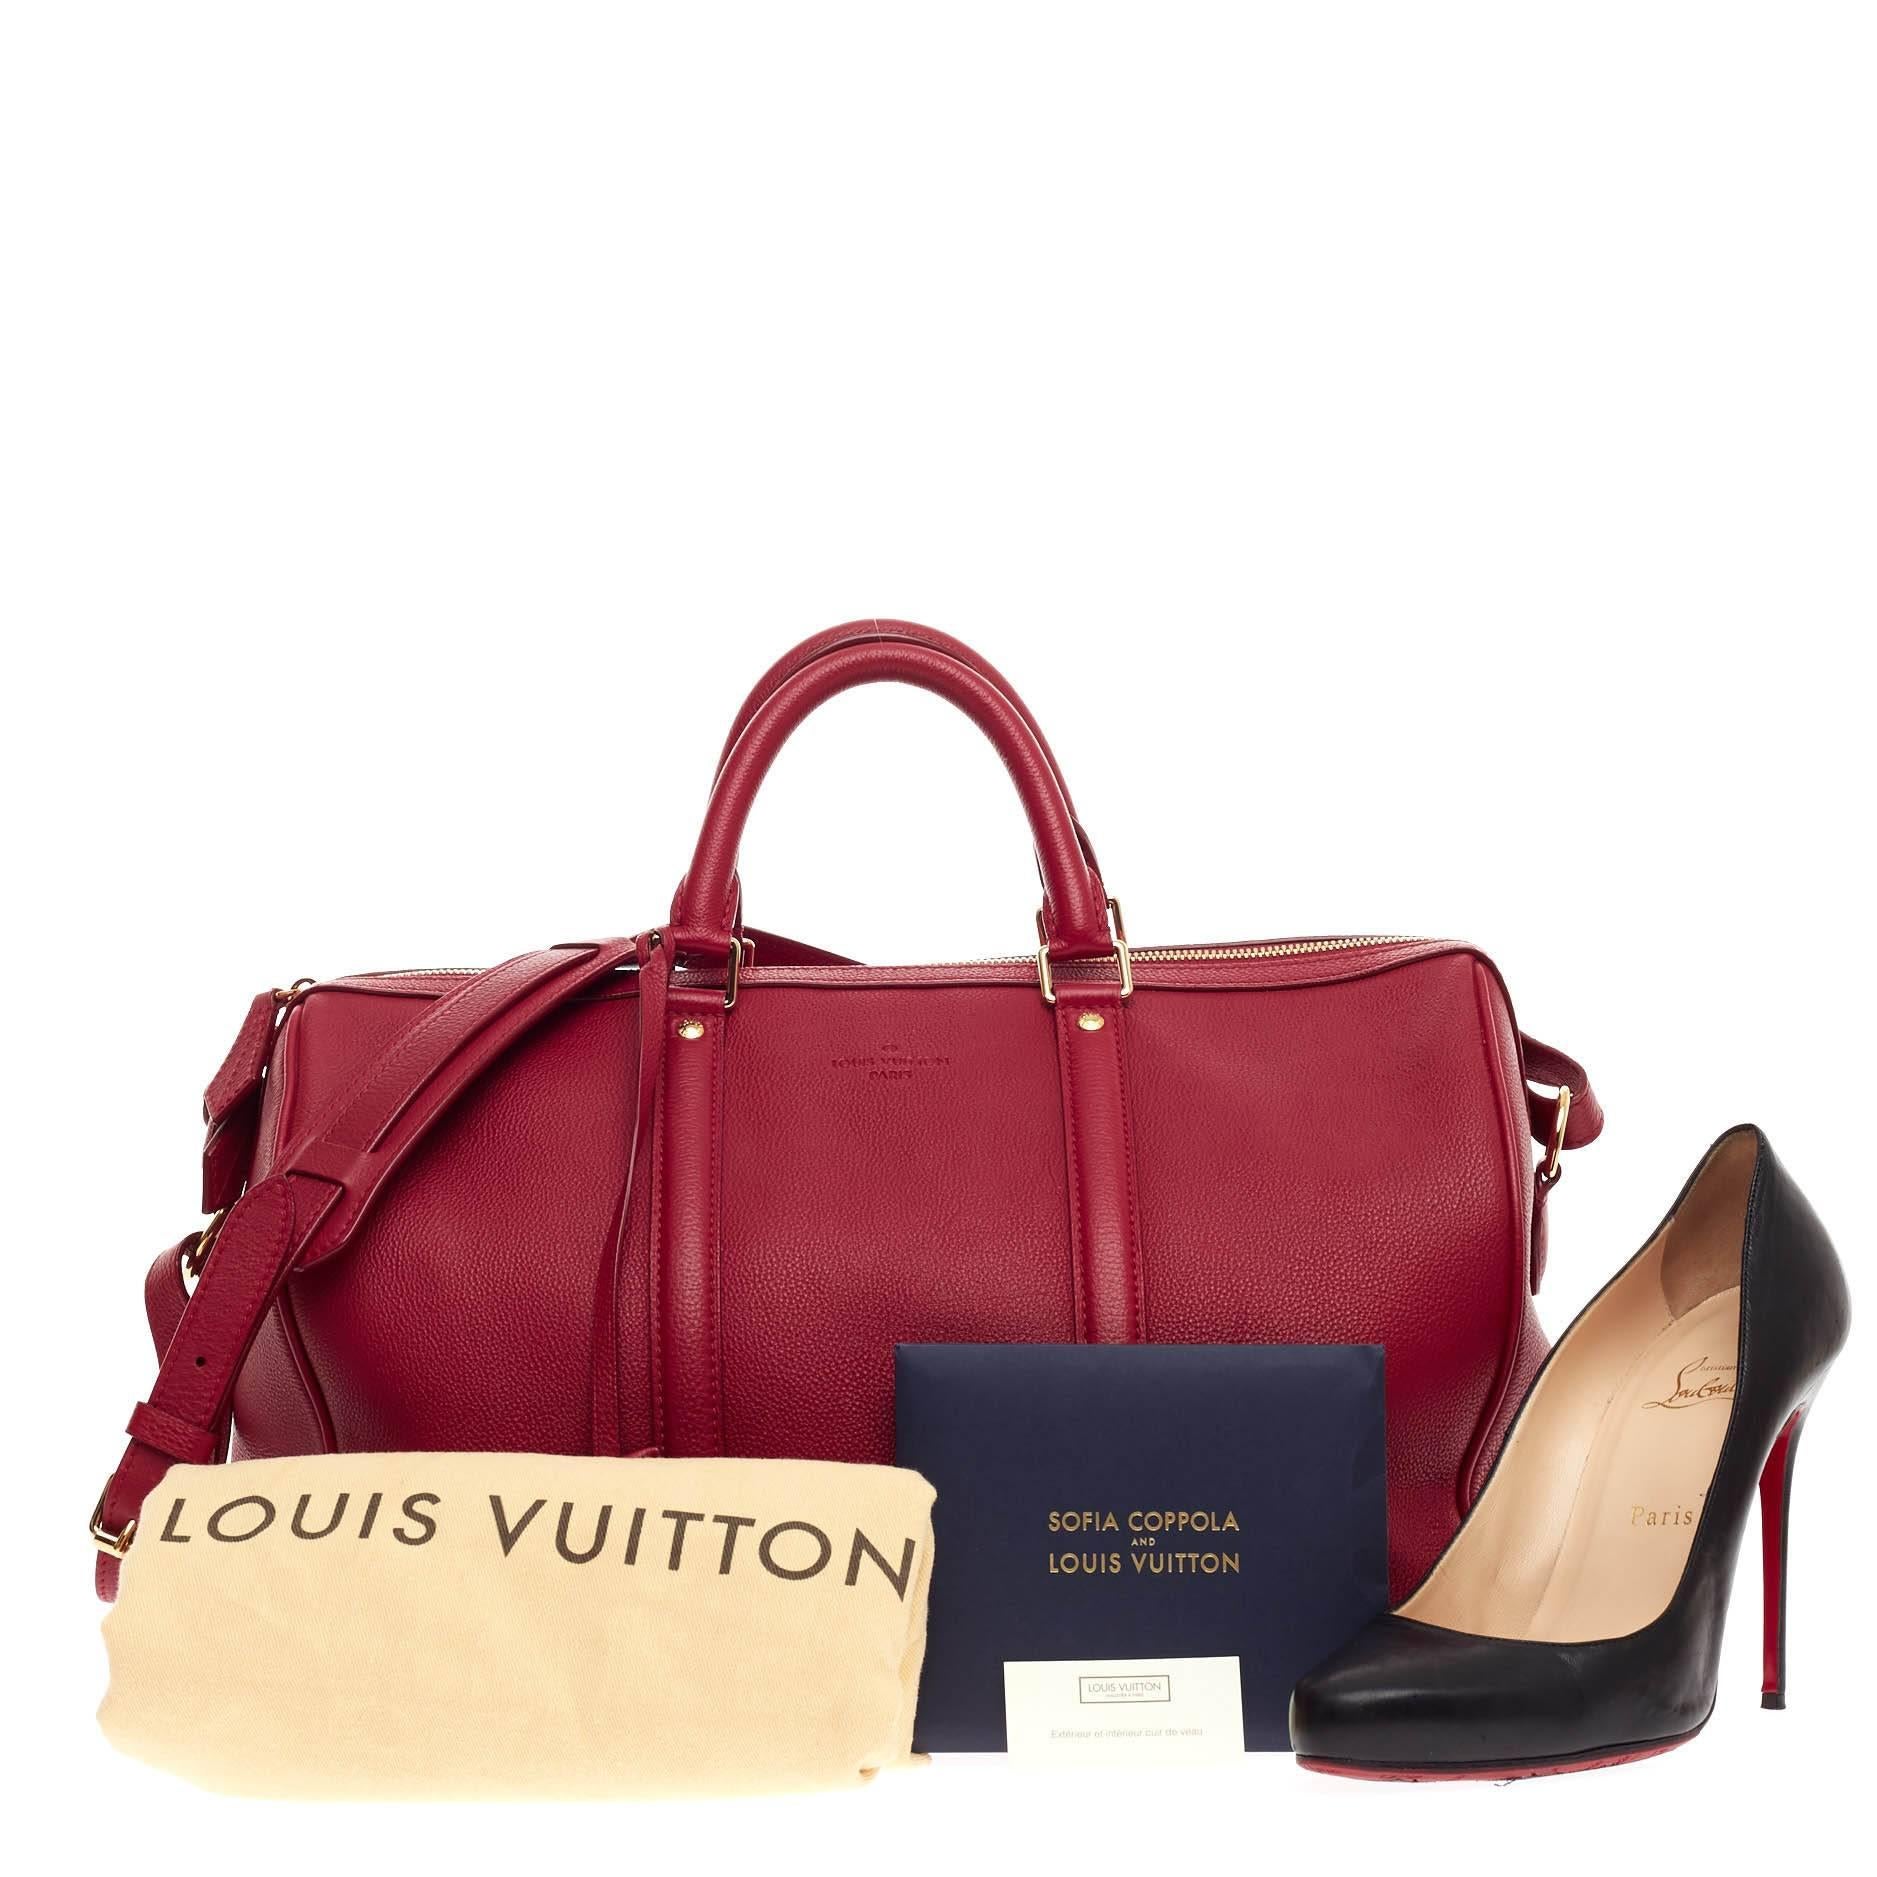 This authentic Louis Vuitton Sofia Coppola SC Bag Leather MM is as stylish and elegant as its designer. Crafted from cherry red grainy leather, this simple yet refined duffle bag features dual-rolled handles, adjustable shoulder strap, LV’s lock and